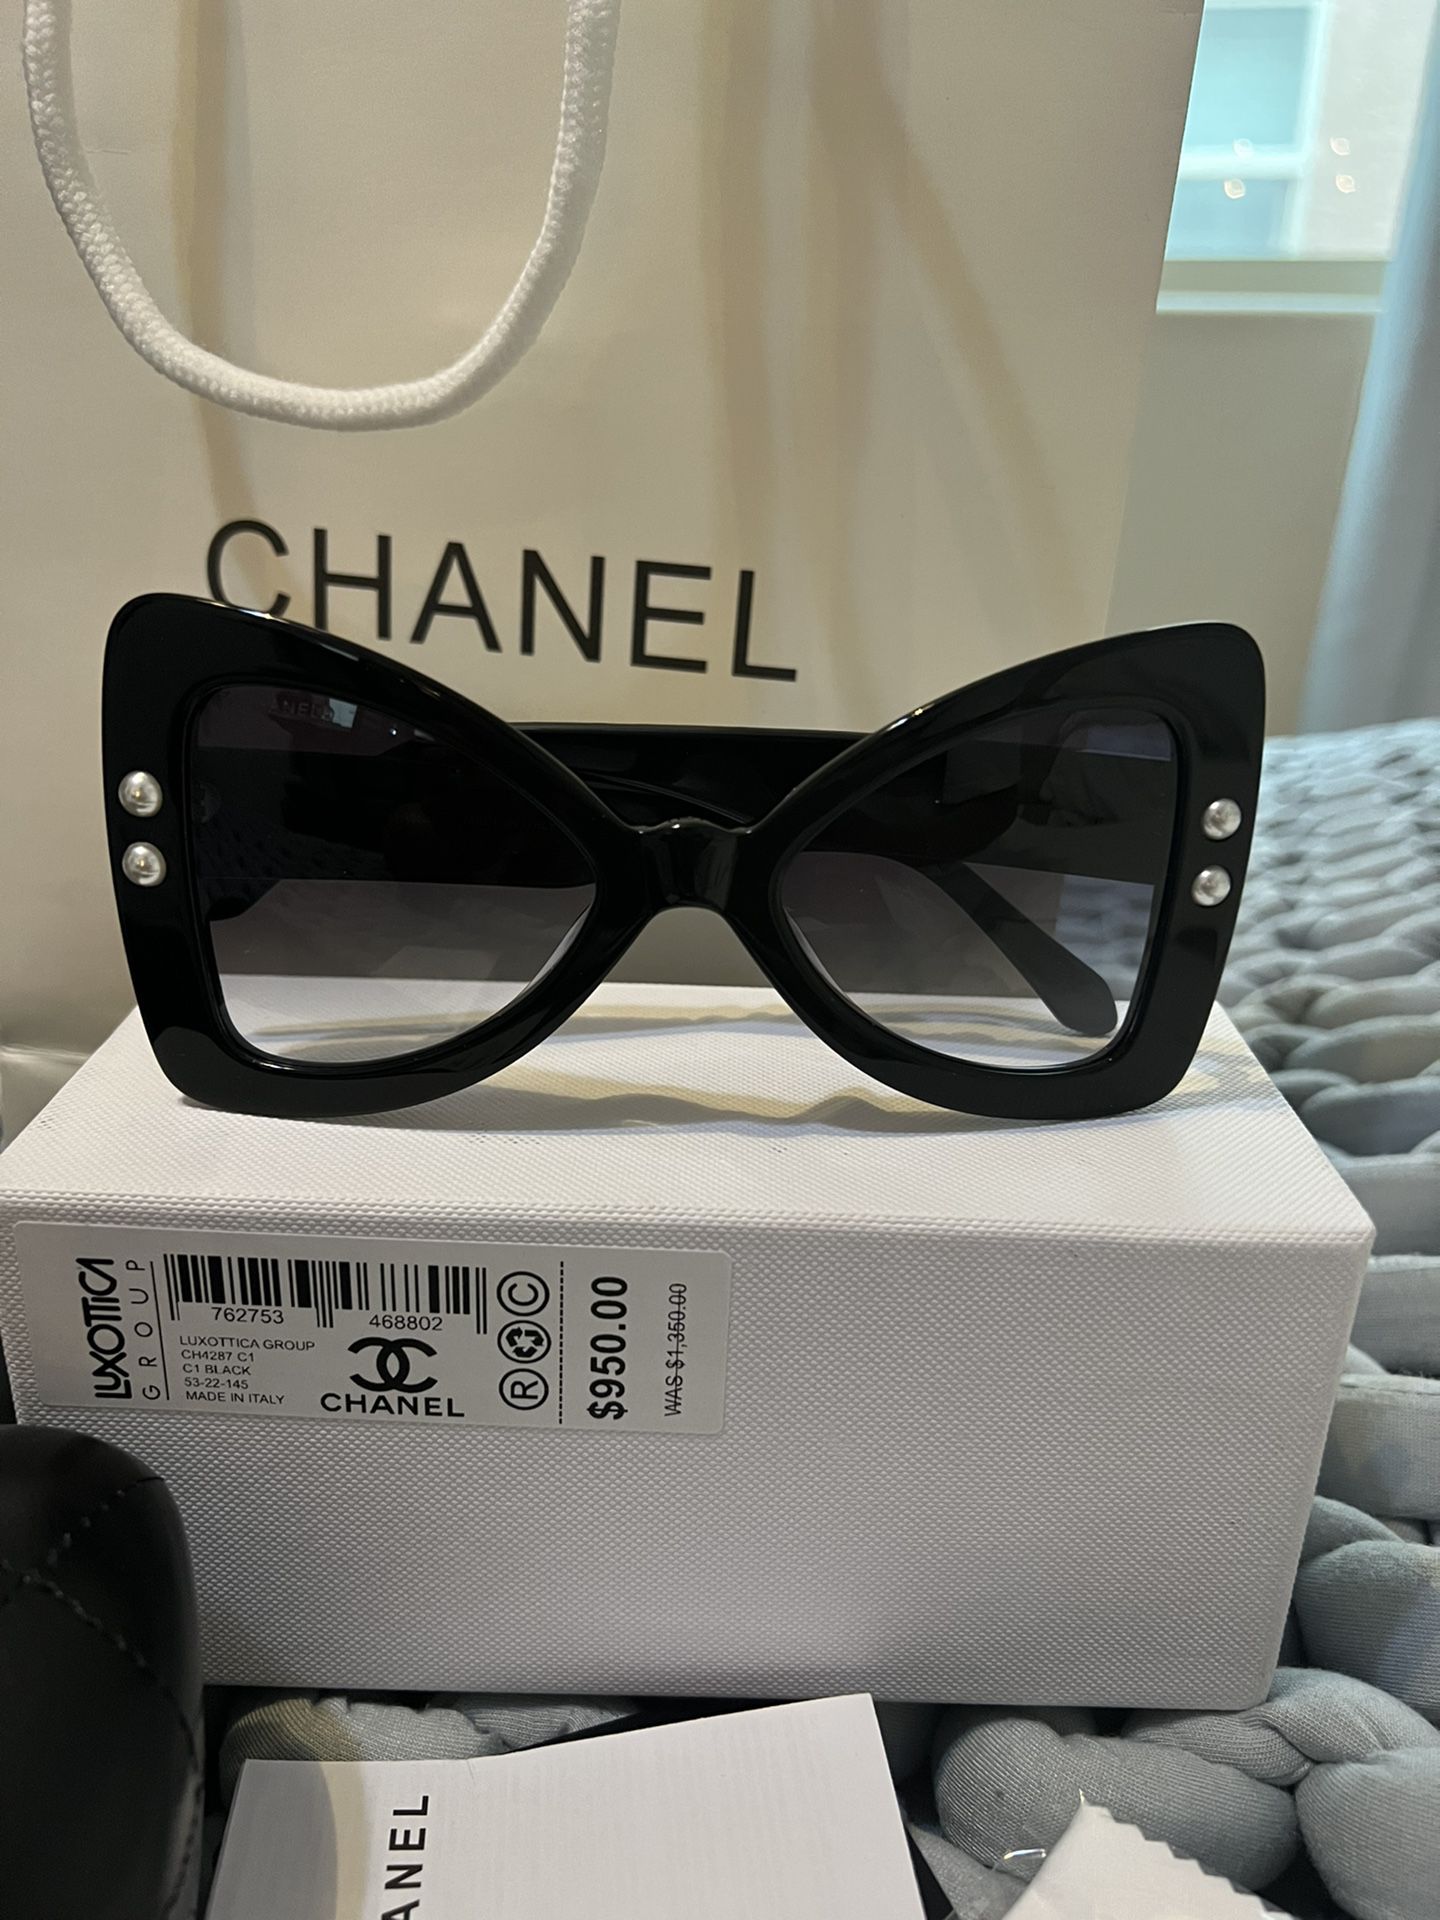 Chanel Sunglasses for Sale in North Las Vegas, NV - OfferUp